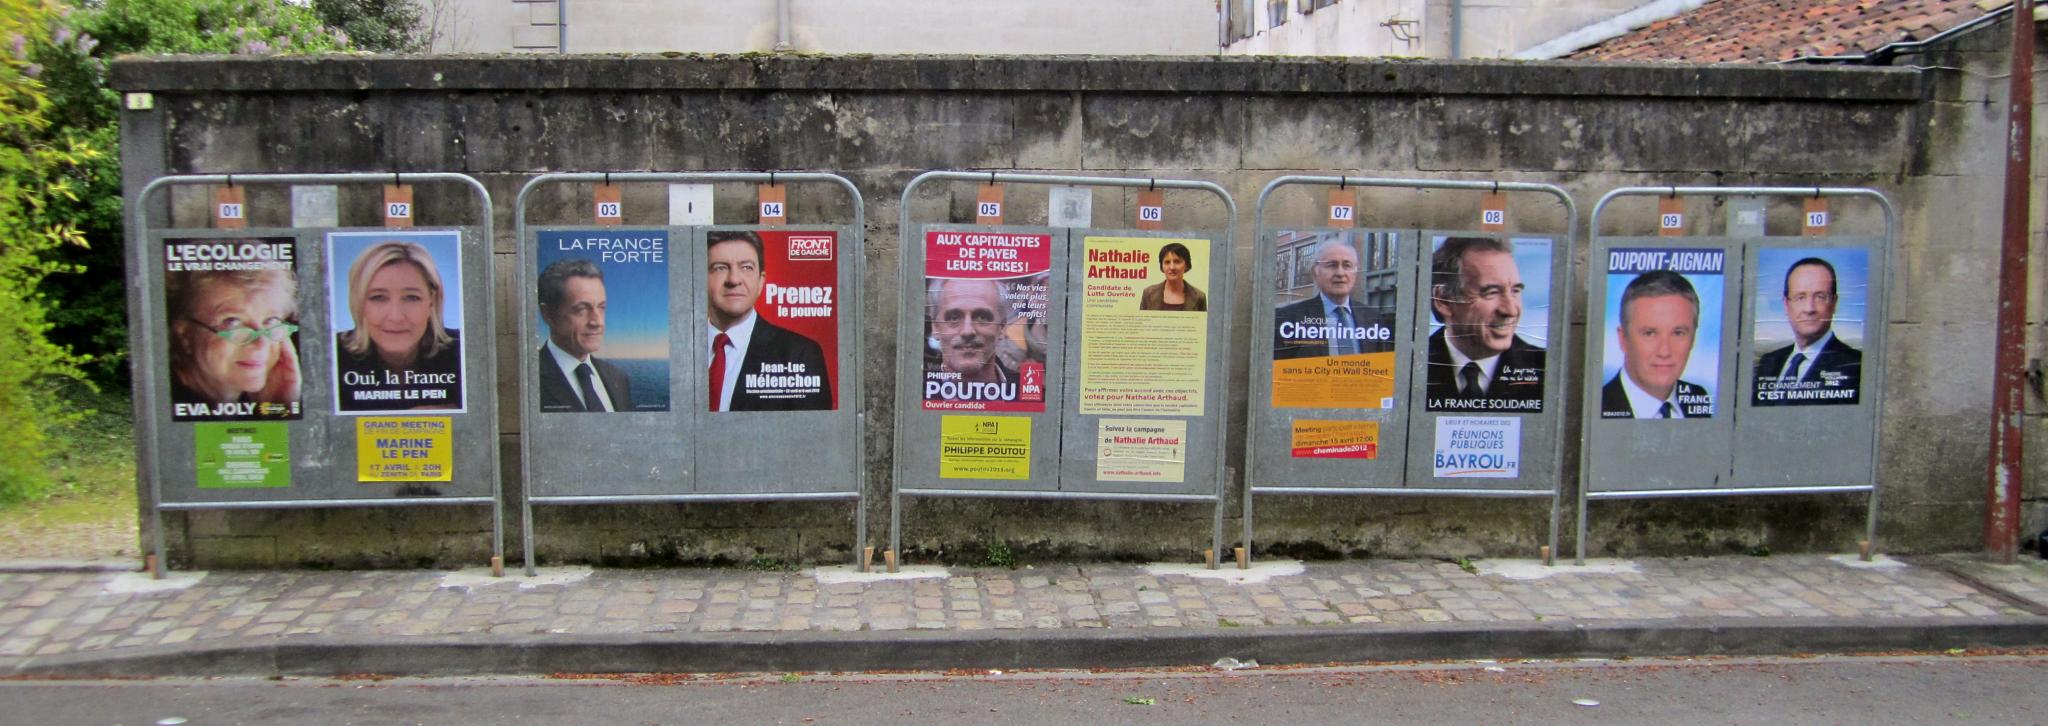 MyFrenchLife™ - MyFrenchLife.org - 2017 - French Legislative Elections - French politics - French election process - political posters 2012